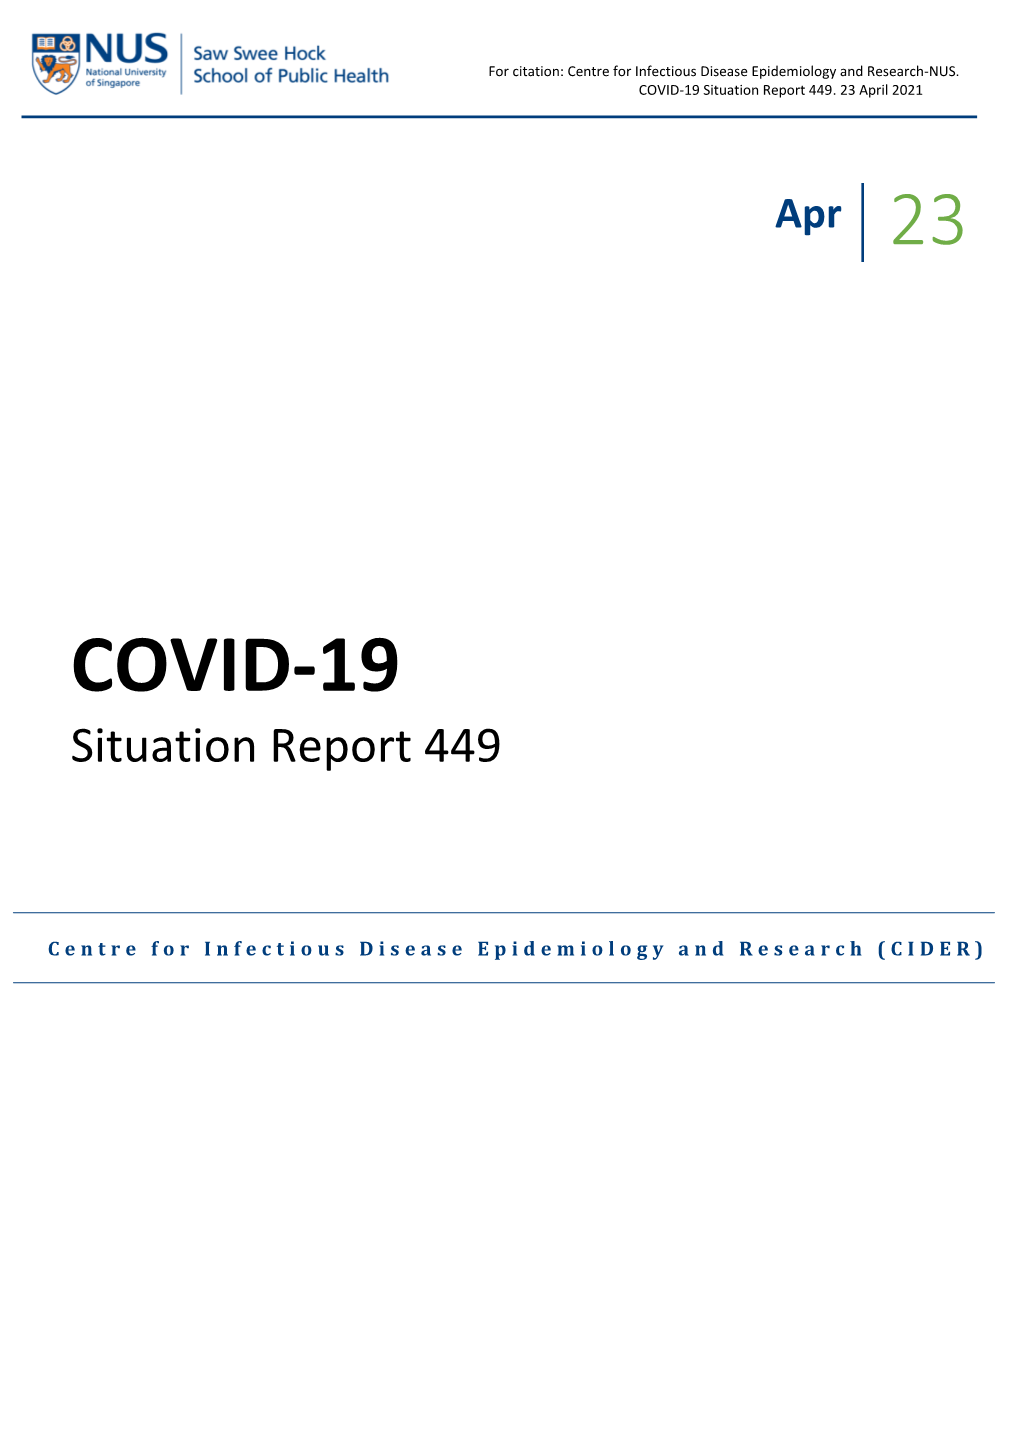 COVID-19 Situation Report 449